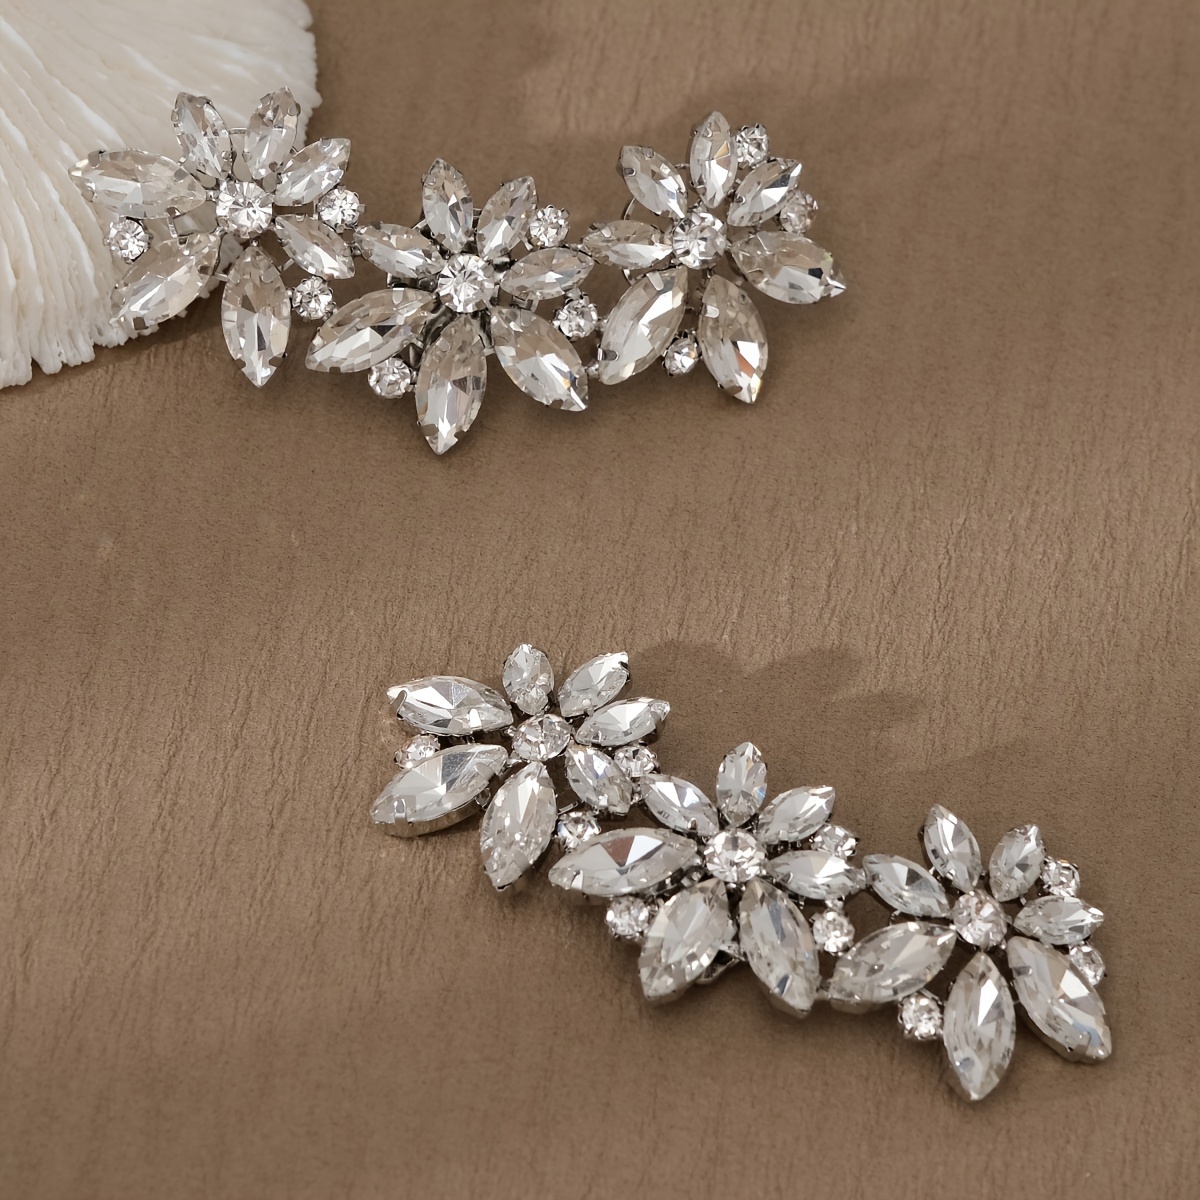  Silver Color Rhinestone Shoe Clips (2 pcs), Clips for Shoes,  Shoe Accessories : Handmade Products